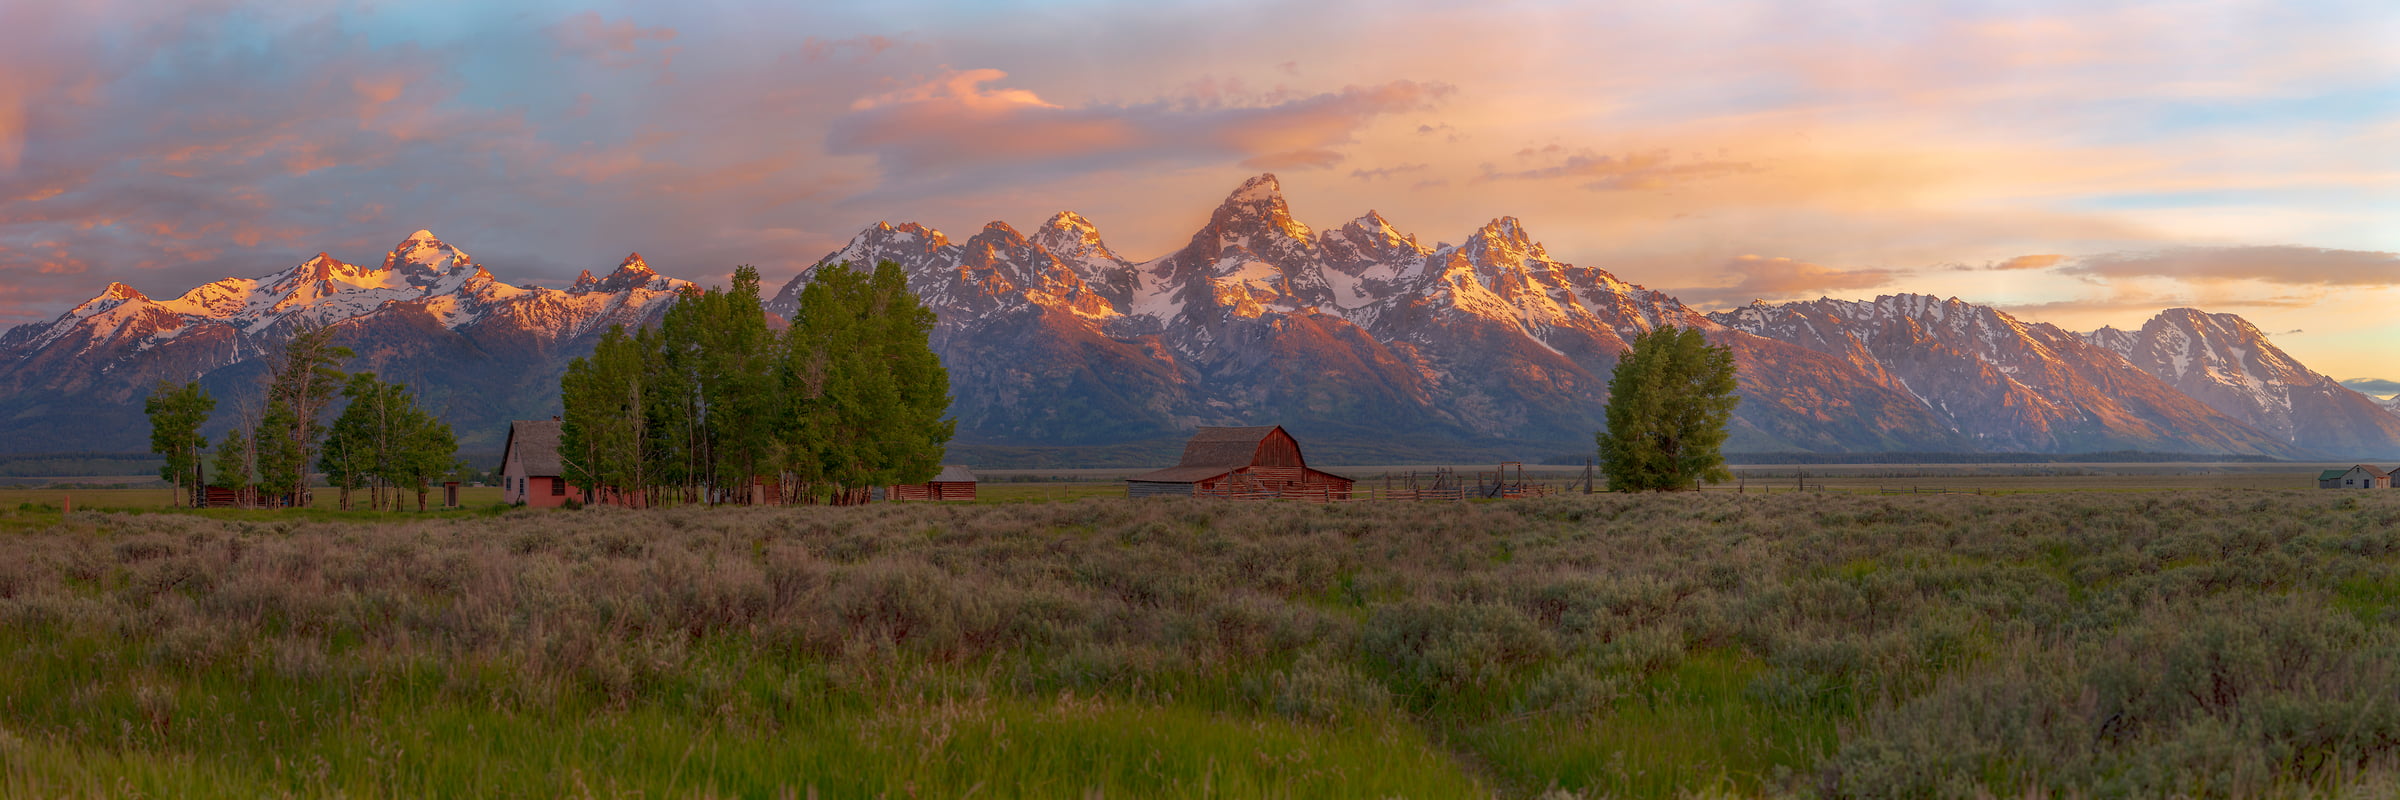 302 megapixels! A very high resolution, large-format VAST photo print of mountains, a field, and a barn in Wyoming; landscape photograph created by John Freeman